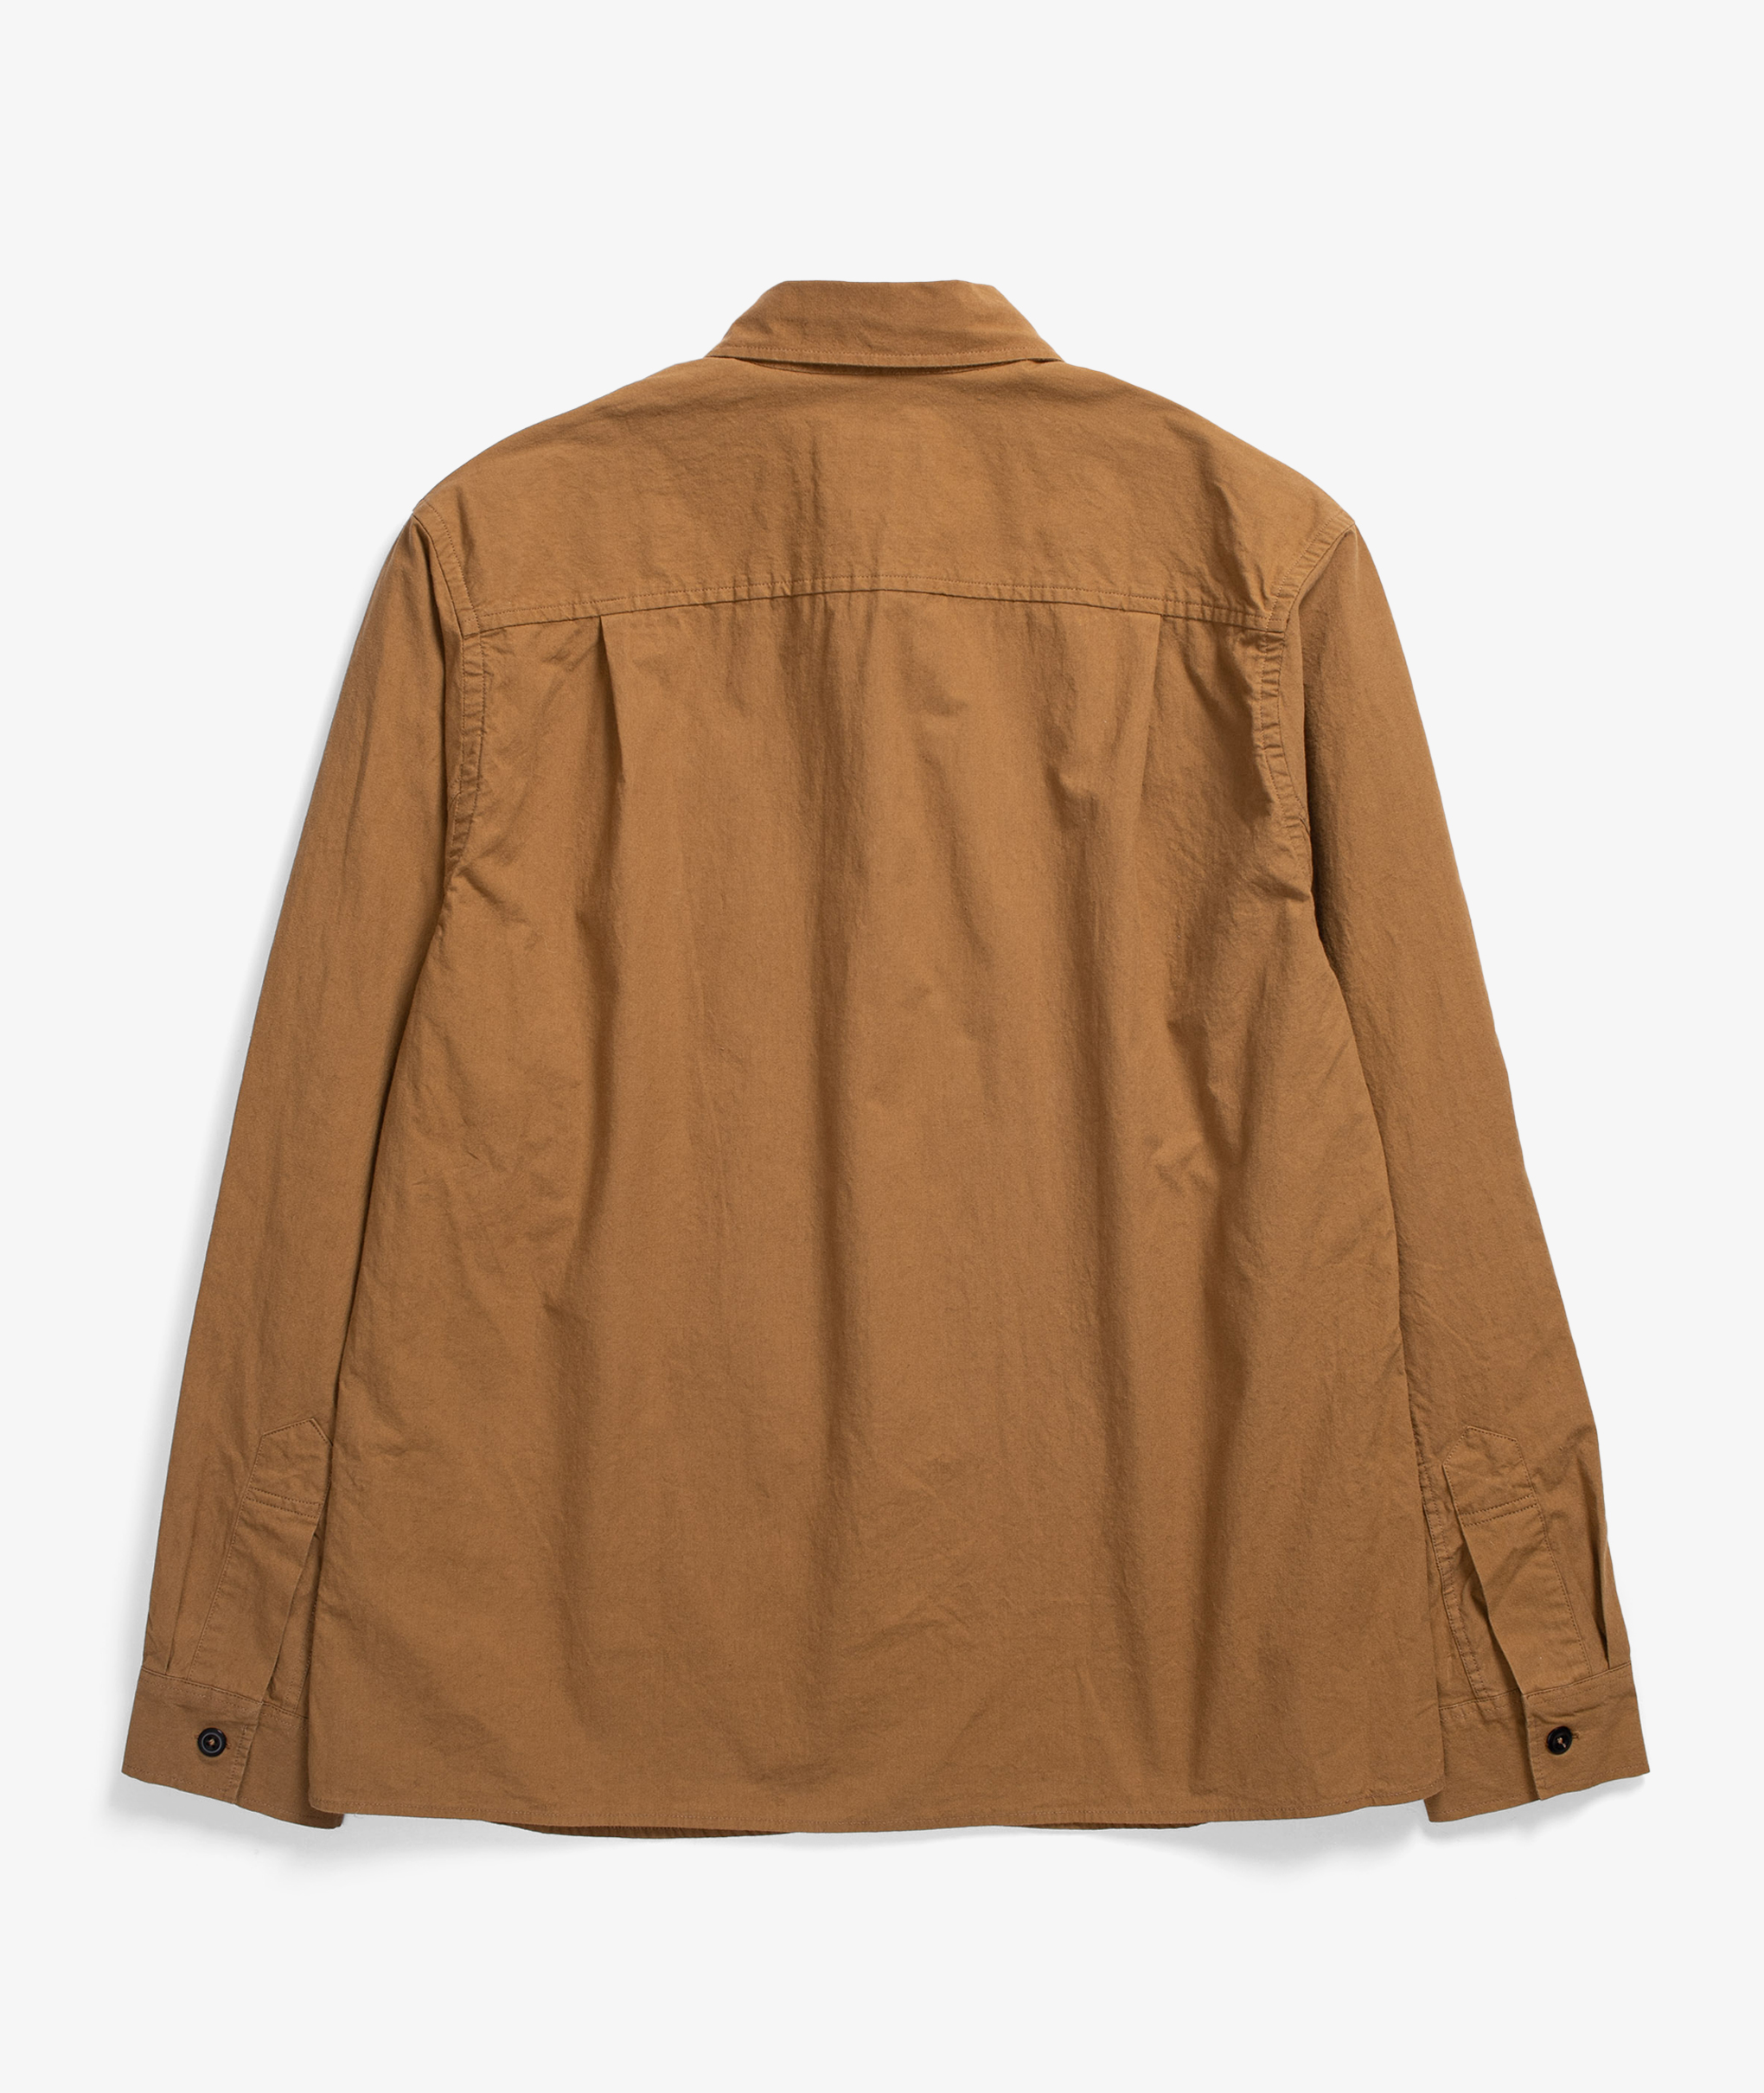 Norse Store | Shipping Worldwide - Margaret Howell MHL Overall Shirt